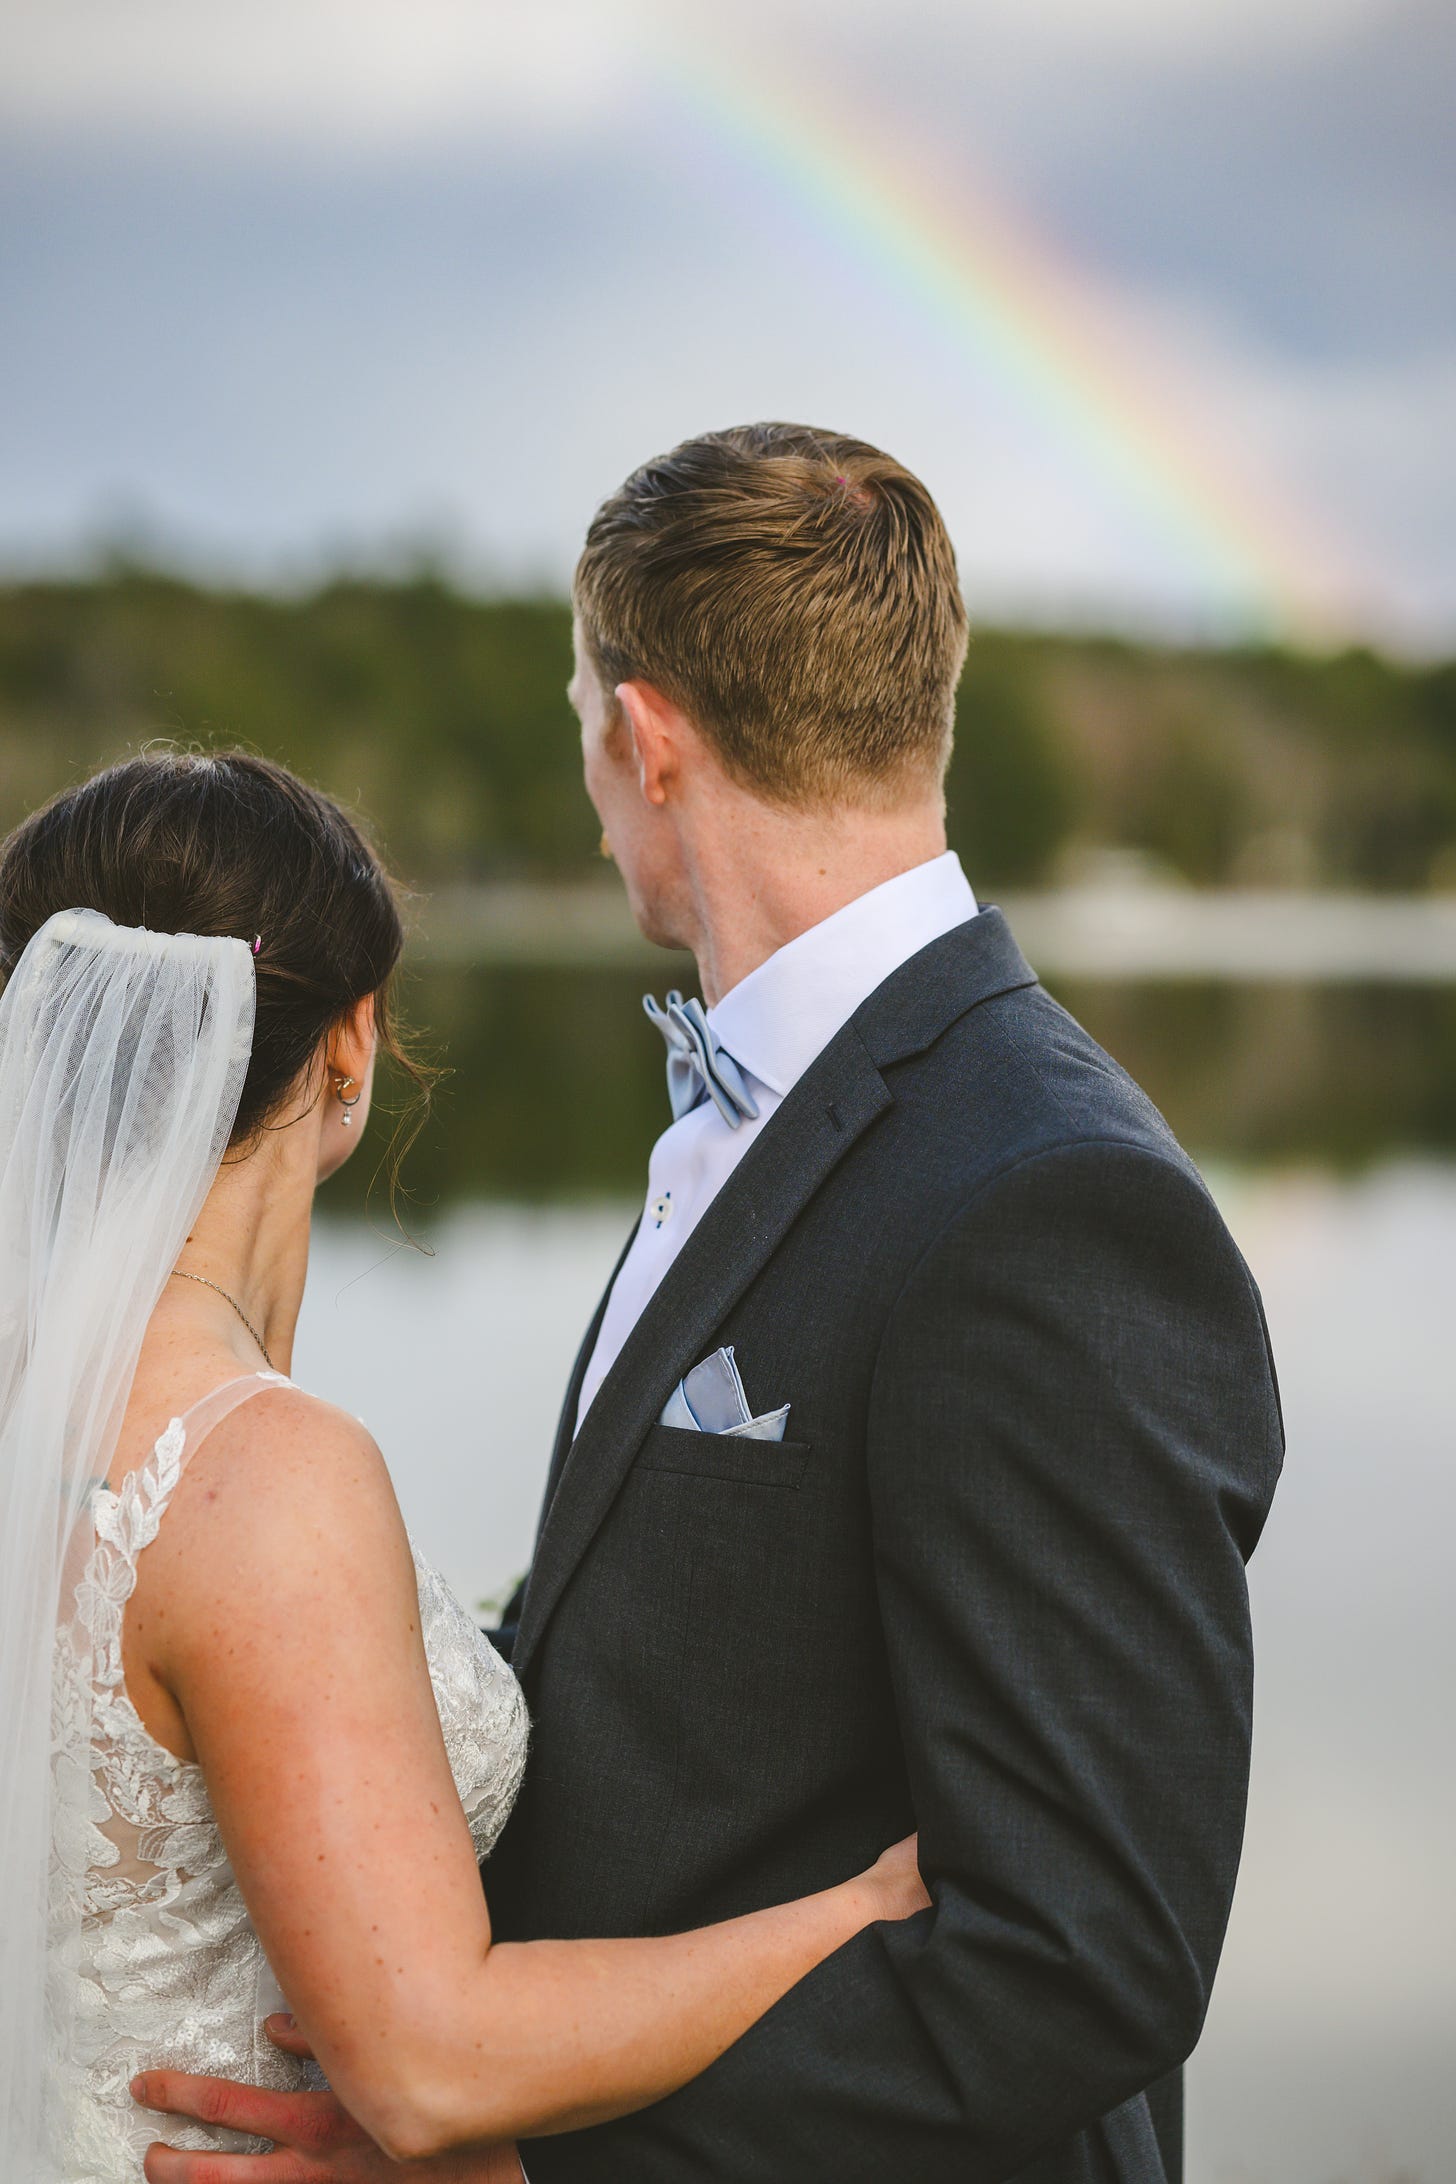 A bride and groom turning to look at a beautiful rainbow